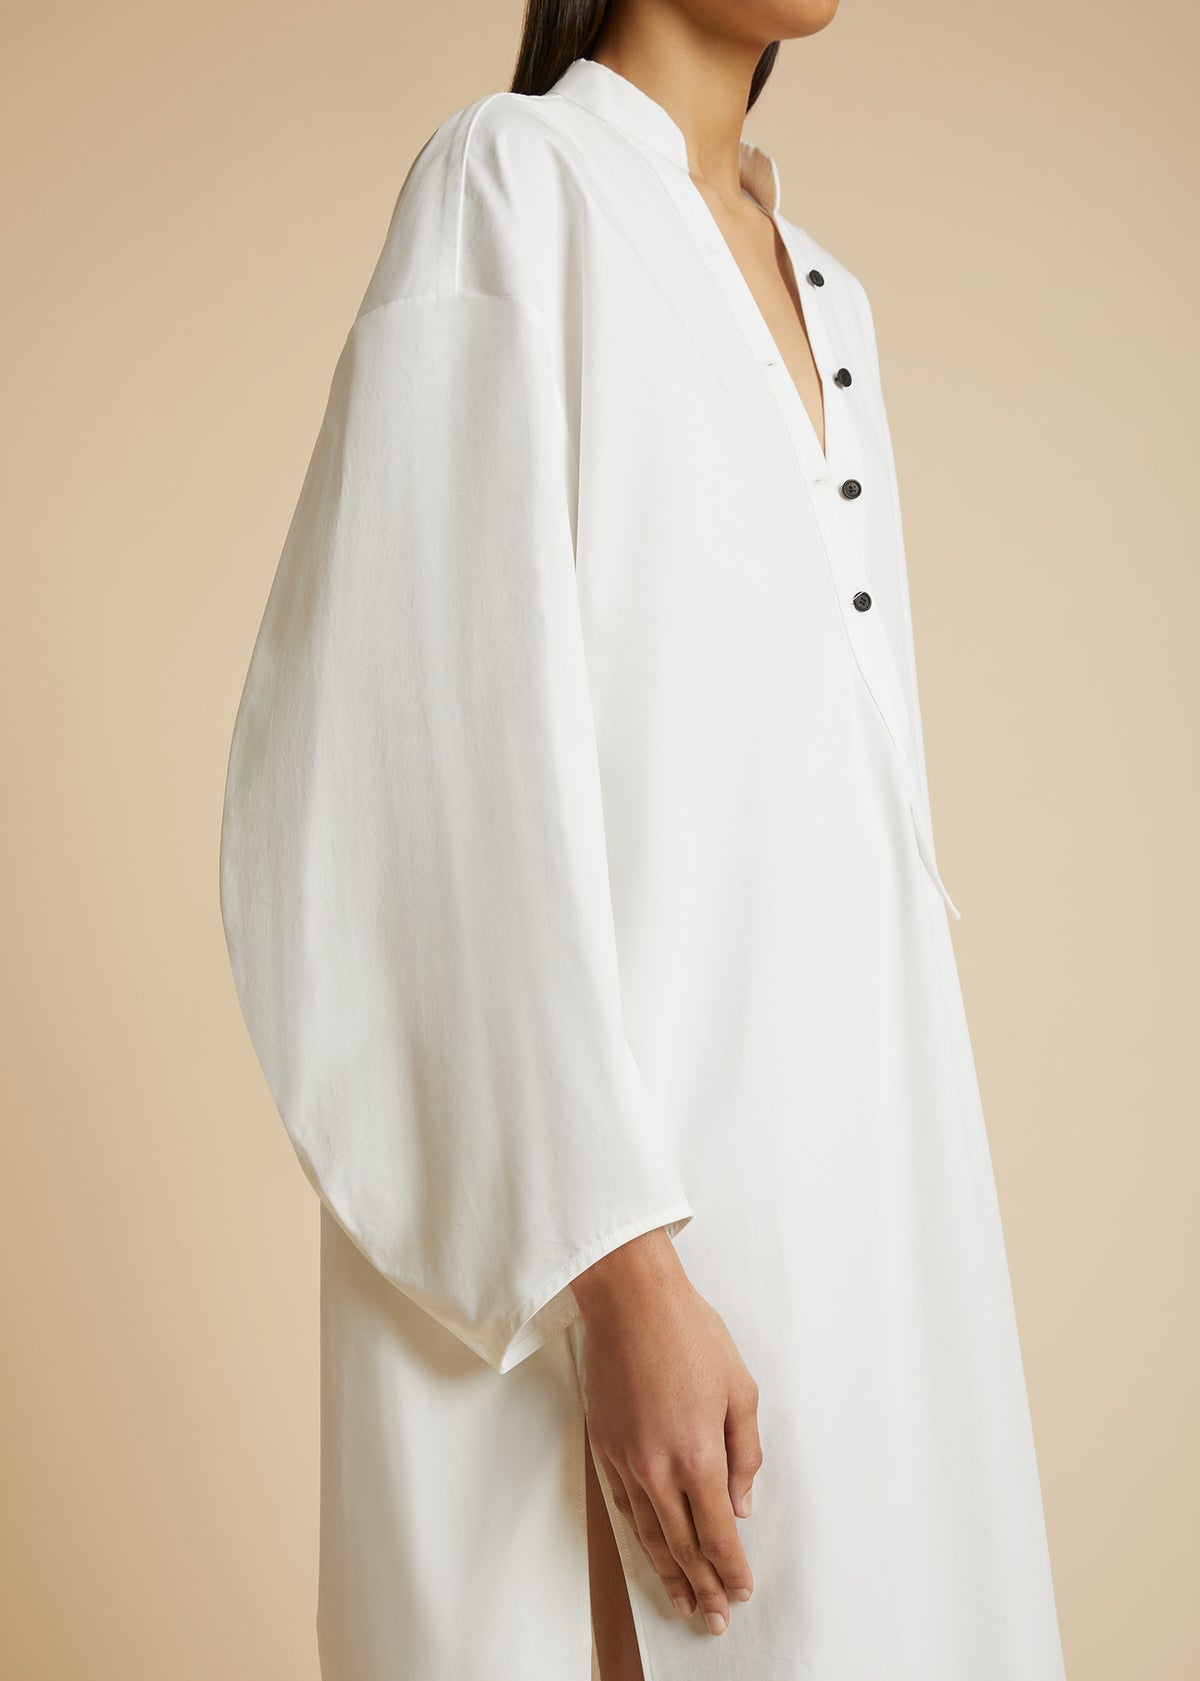 The Brom Dress in White - 4